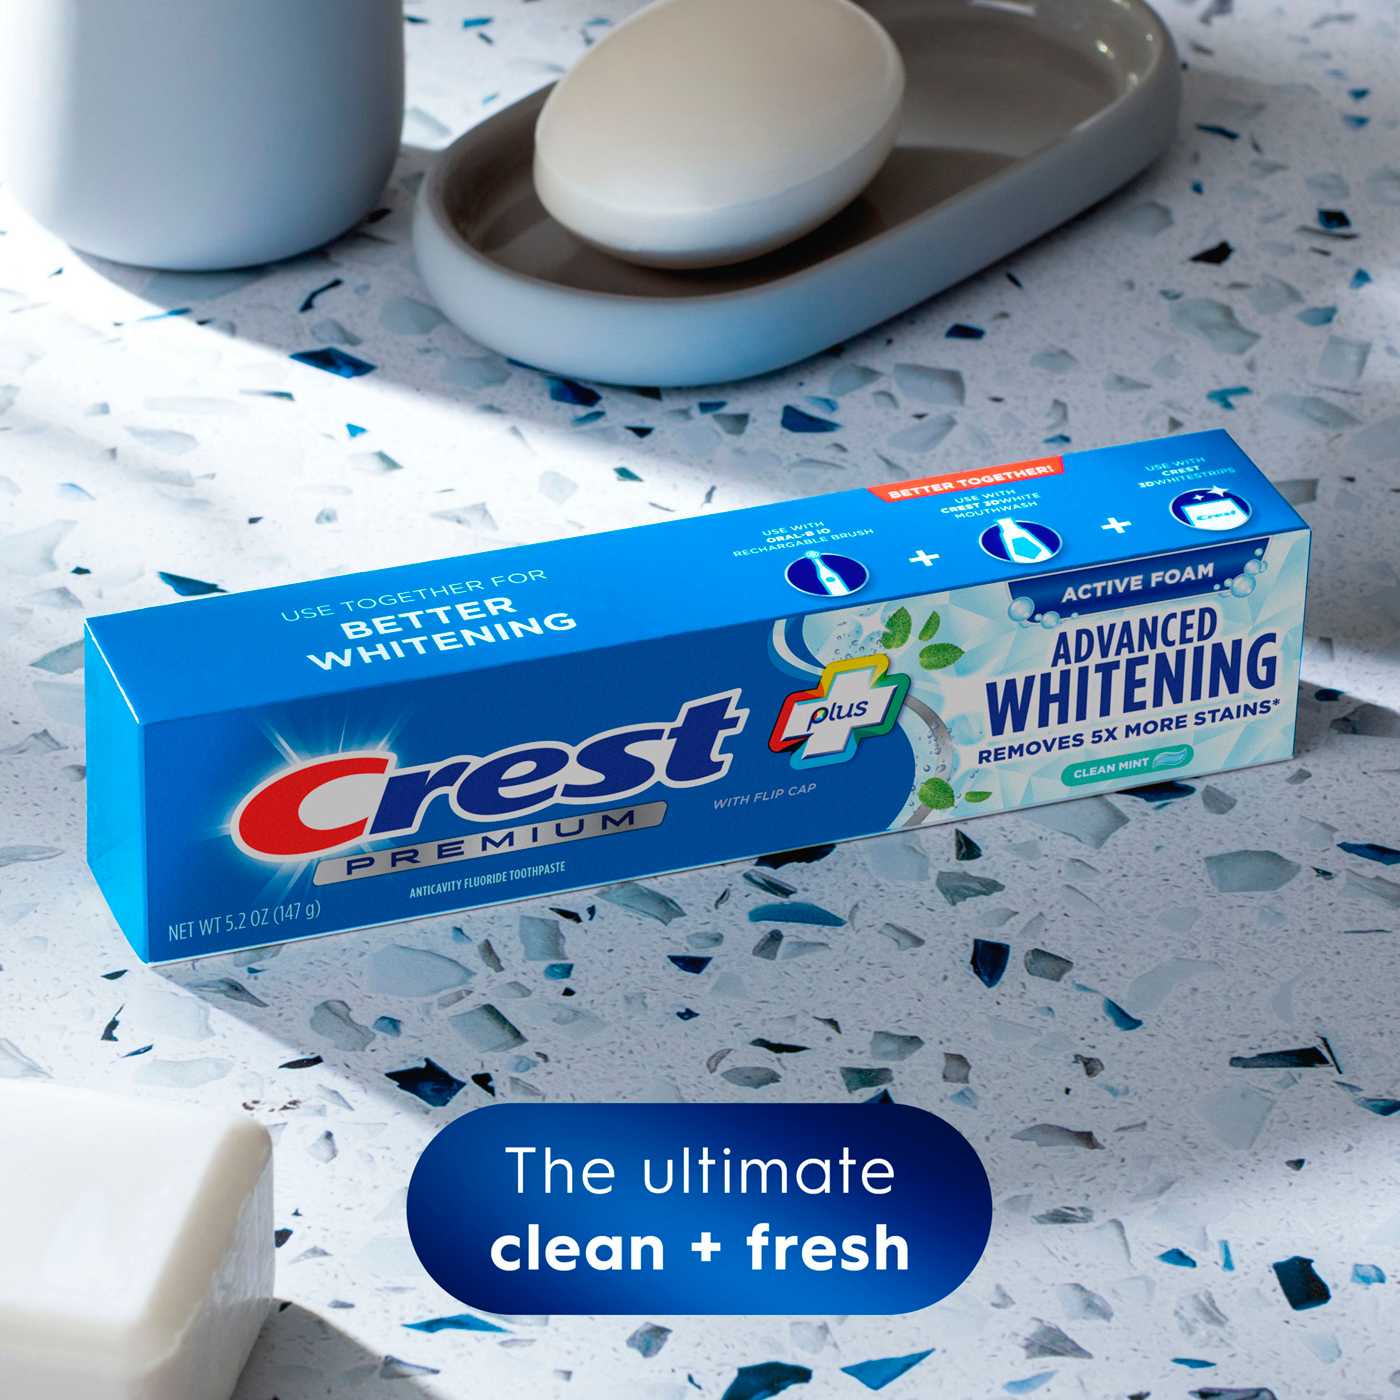 Crest Premium + Advanced Whitening Active Foam Toothpaste - Clean Mint; image 8 of 8